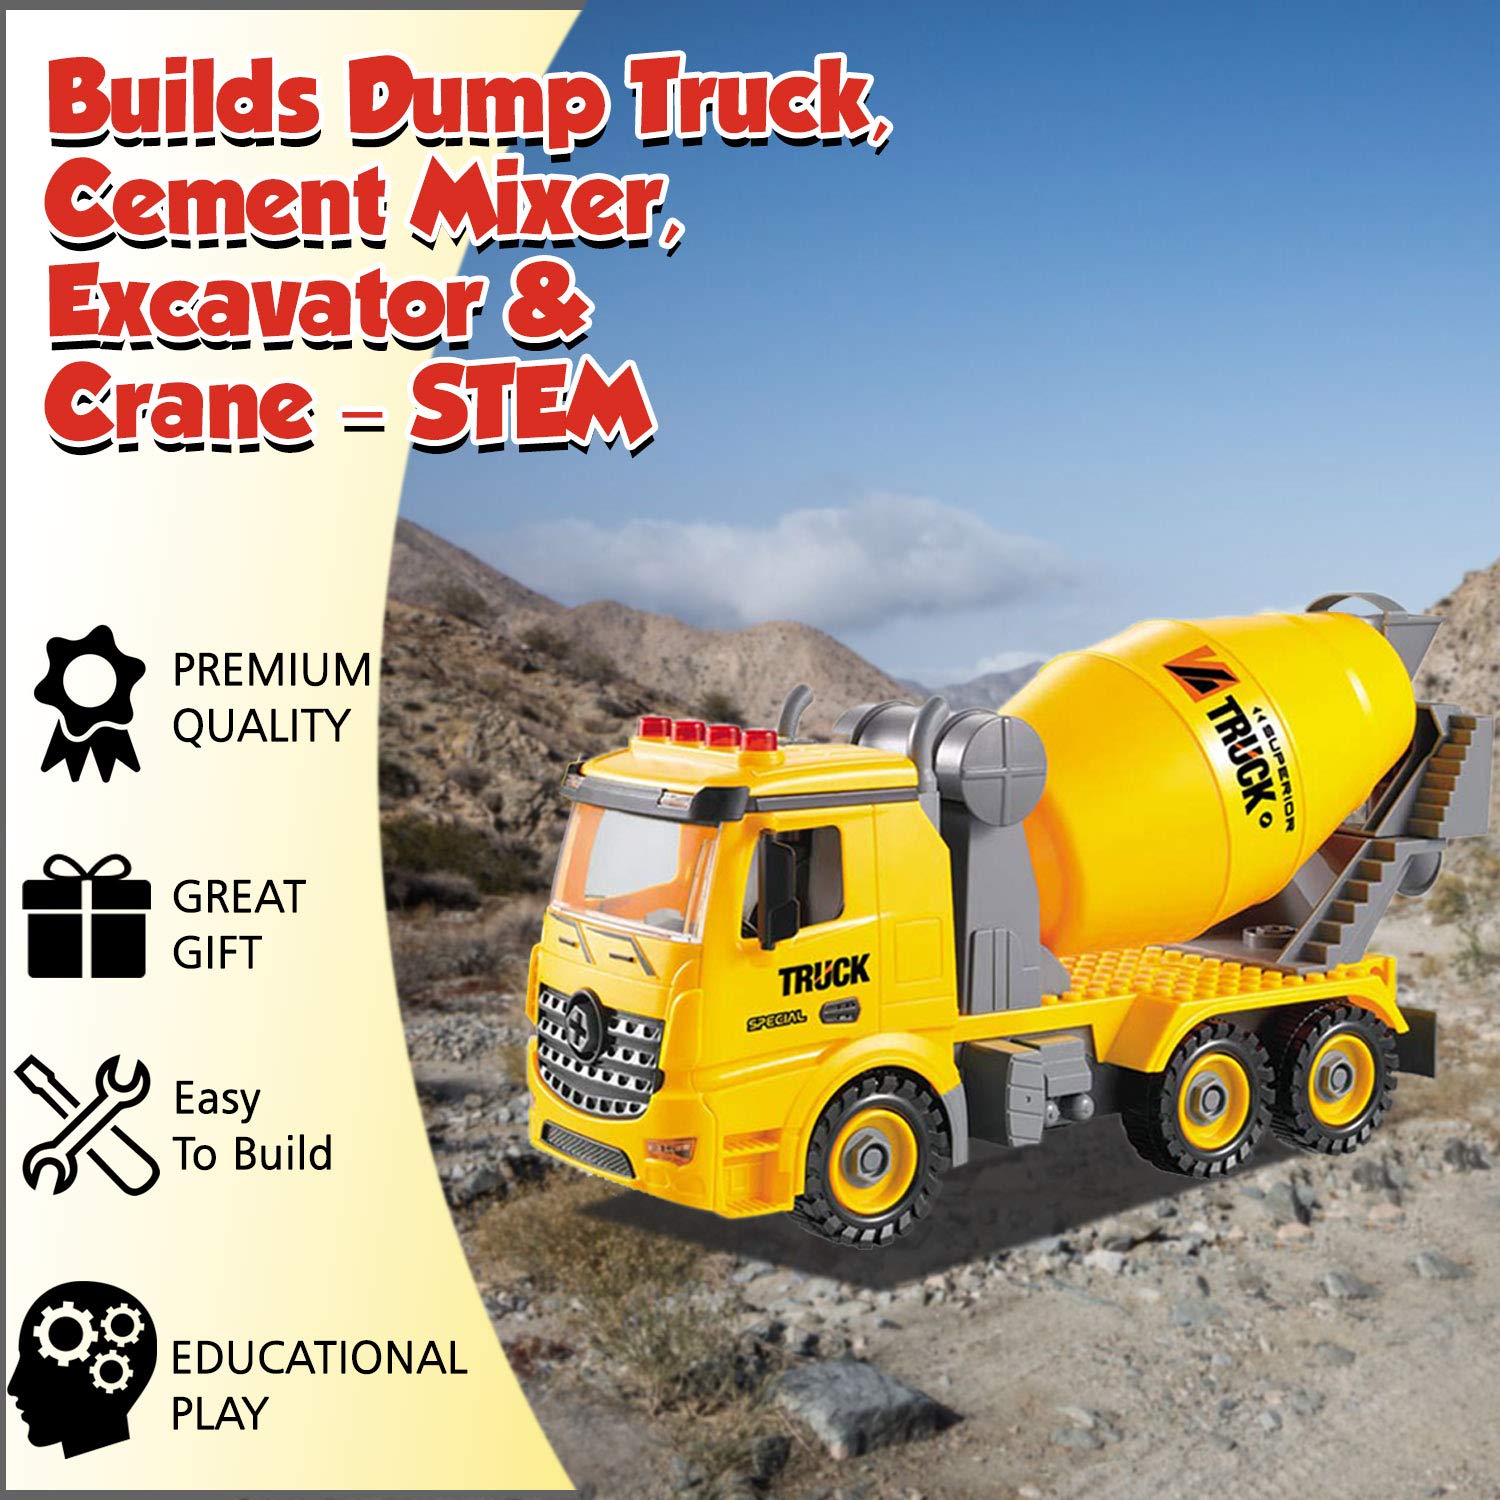 4-in-2 Take Apart Construction Truck Toy – Builds Dump Truck, Cement Mixer, Excavator & Crane – STEM Learning Toy & DIY Building Play Set for Kids Ages 6 In Up